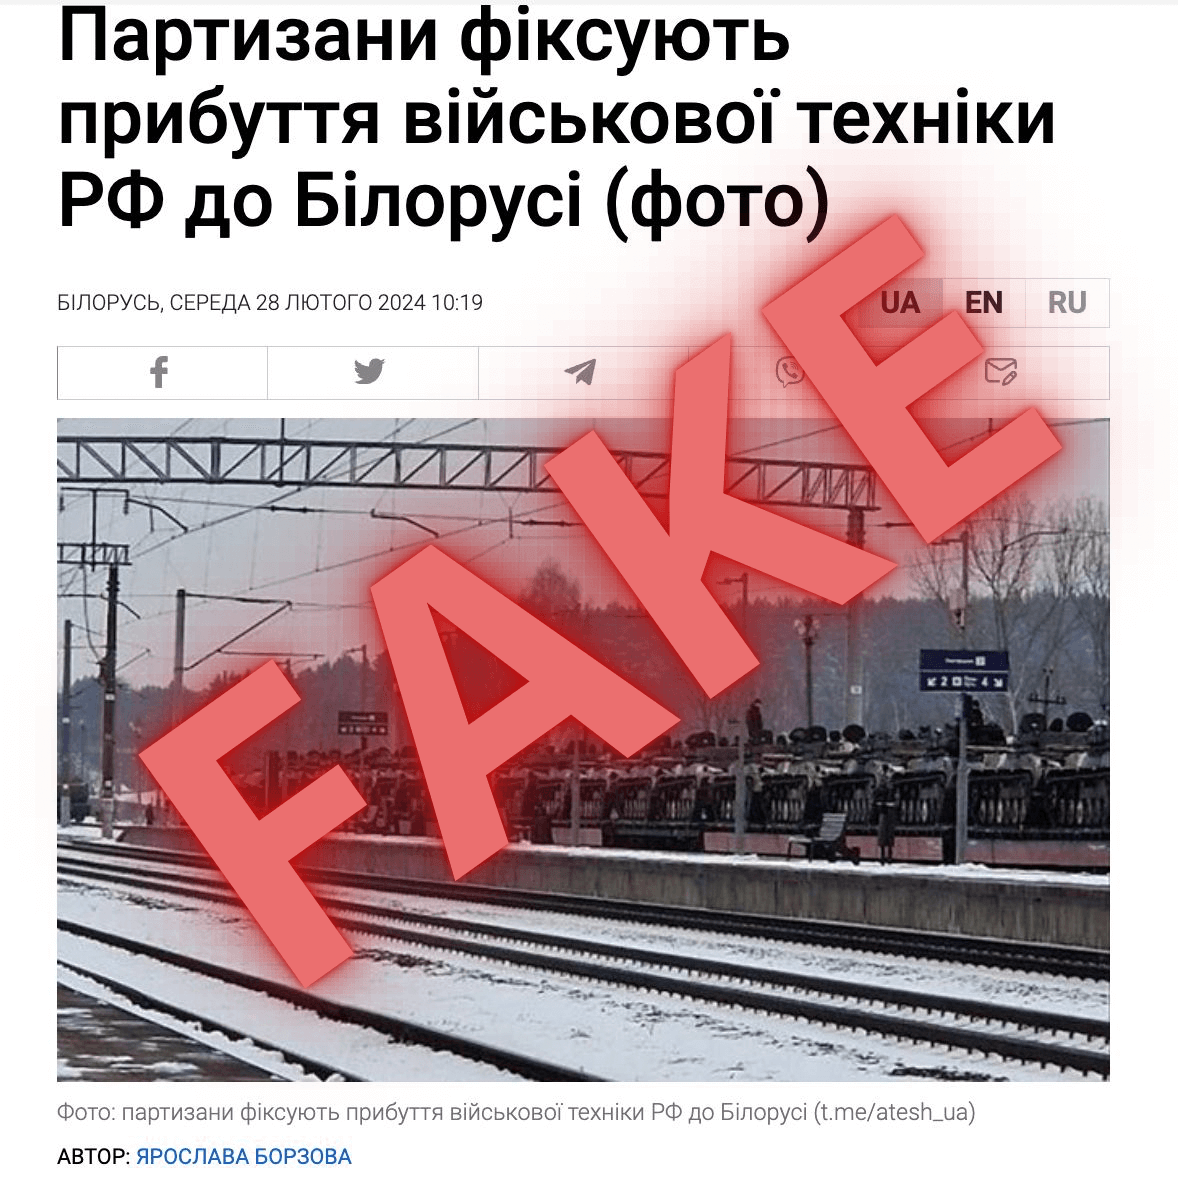 Ukrainian media outlets claim that a military cargo train with Russian equipment has arrived in Belarus. It’s not true.